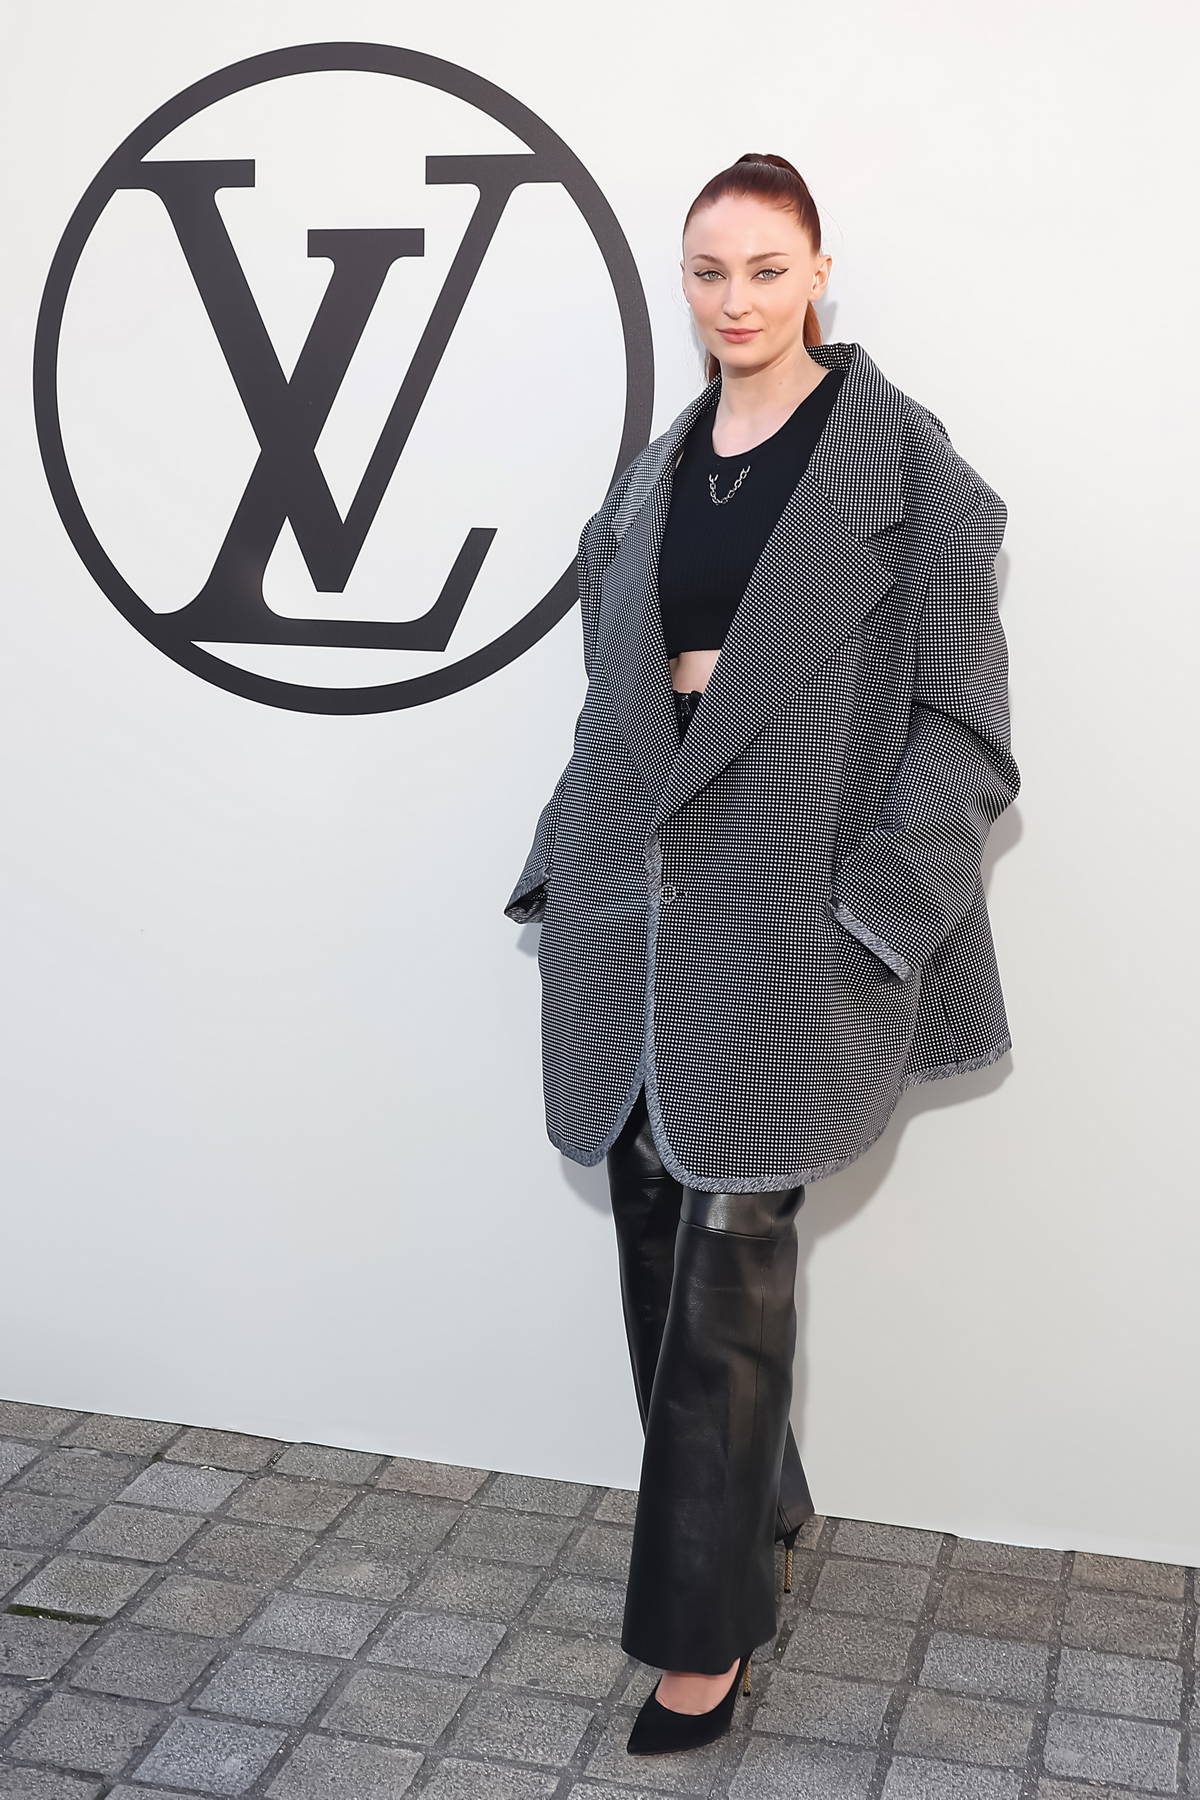 Sophie Turner Louis Vuitton Fashion Show October 5, 2016 – Star Style